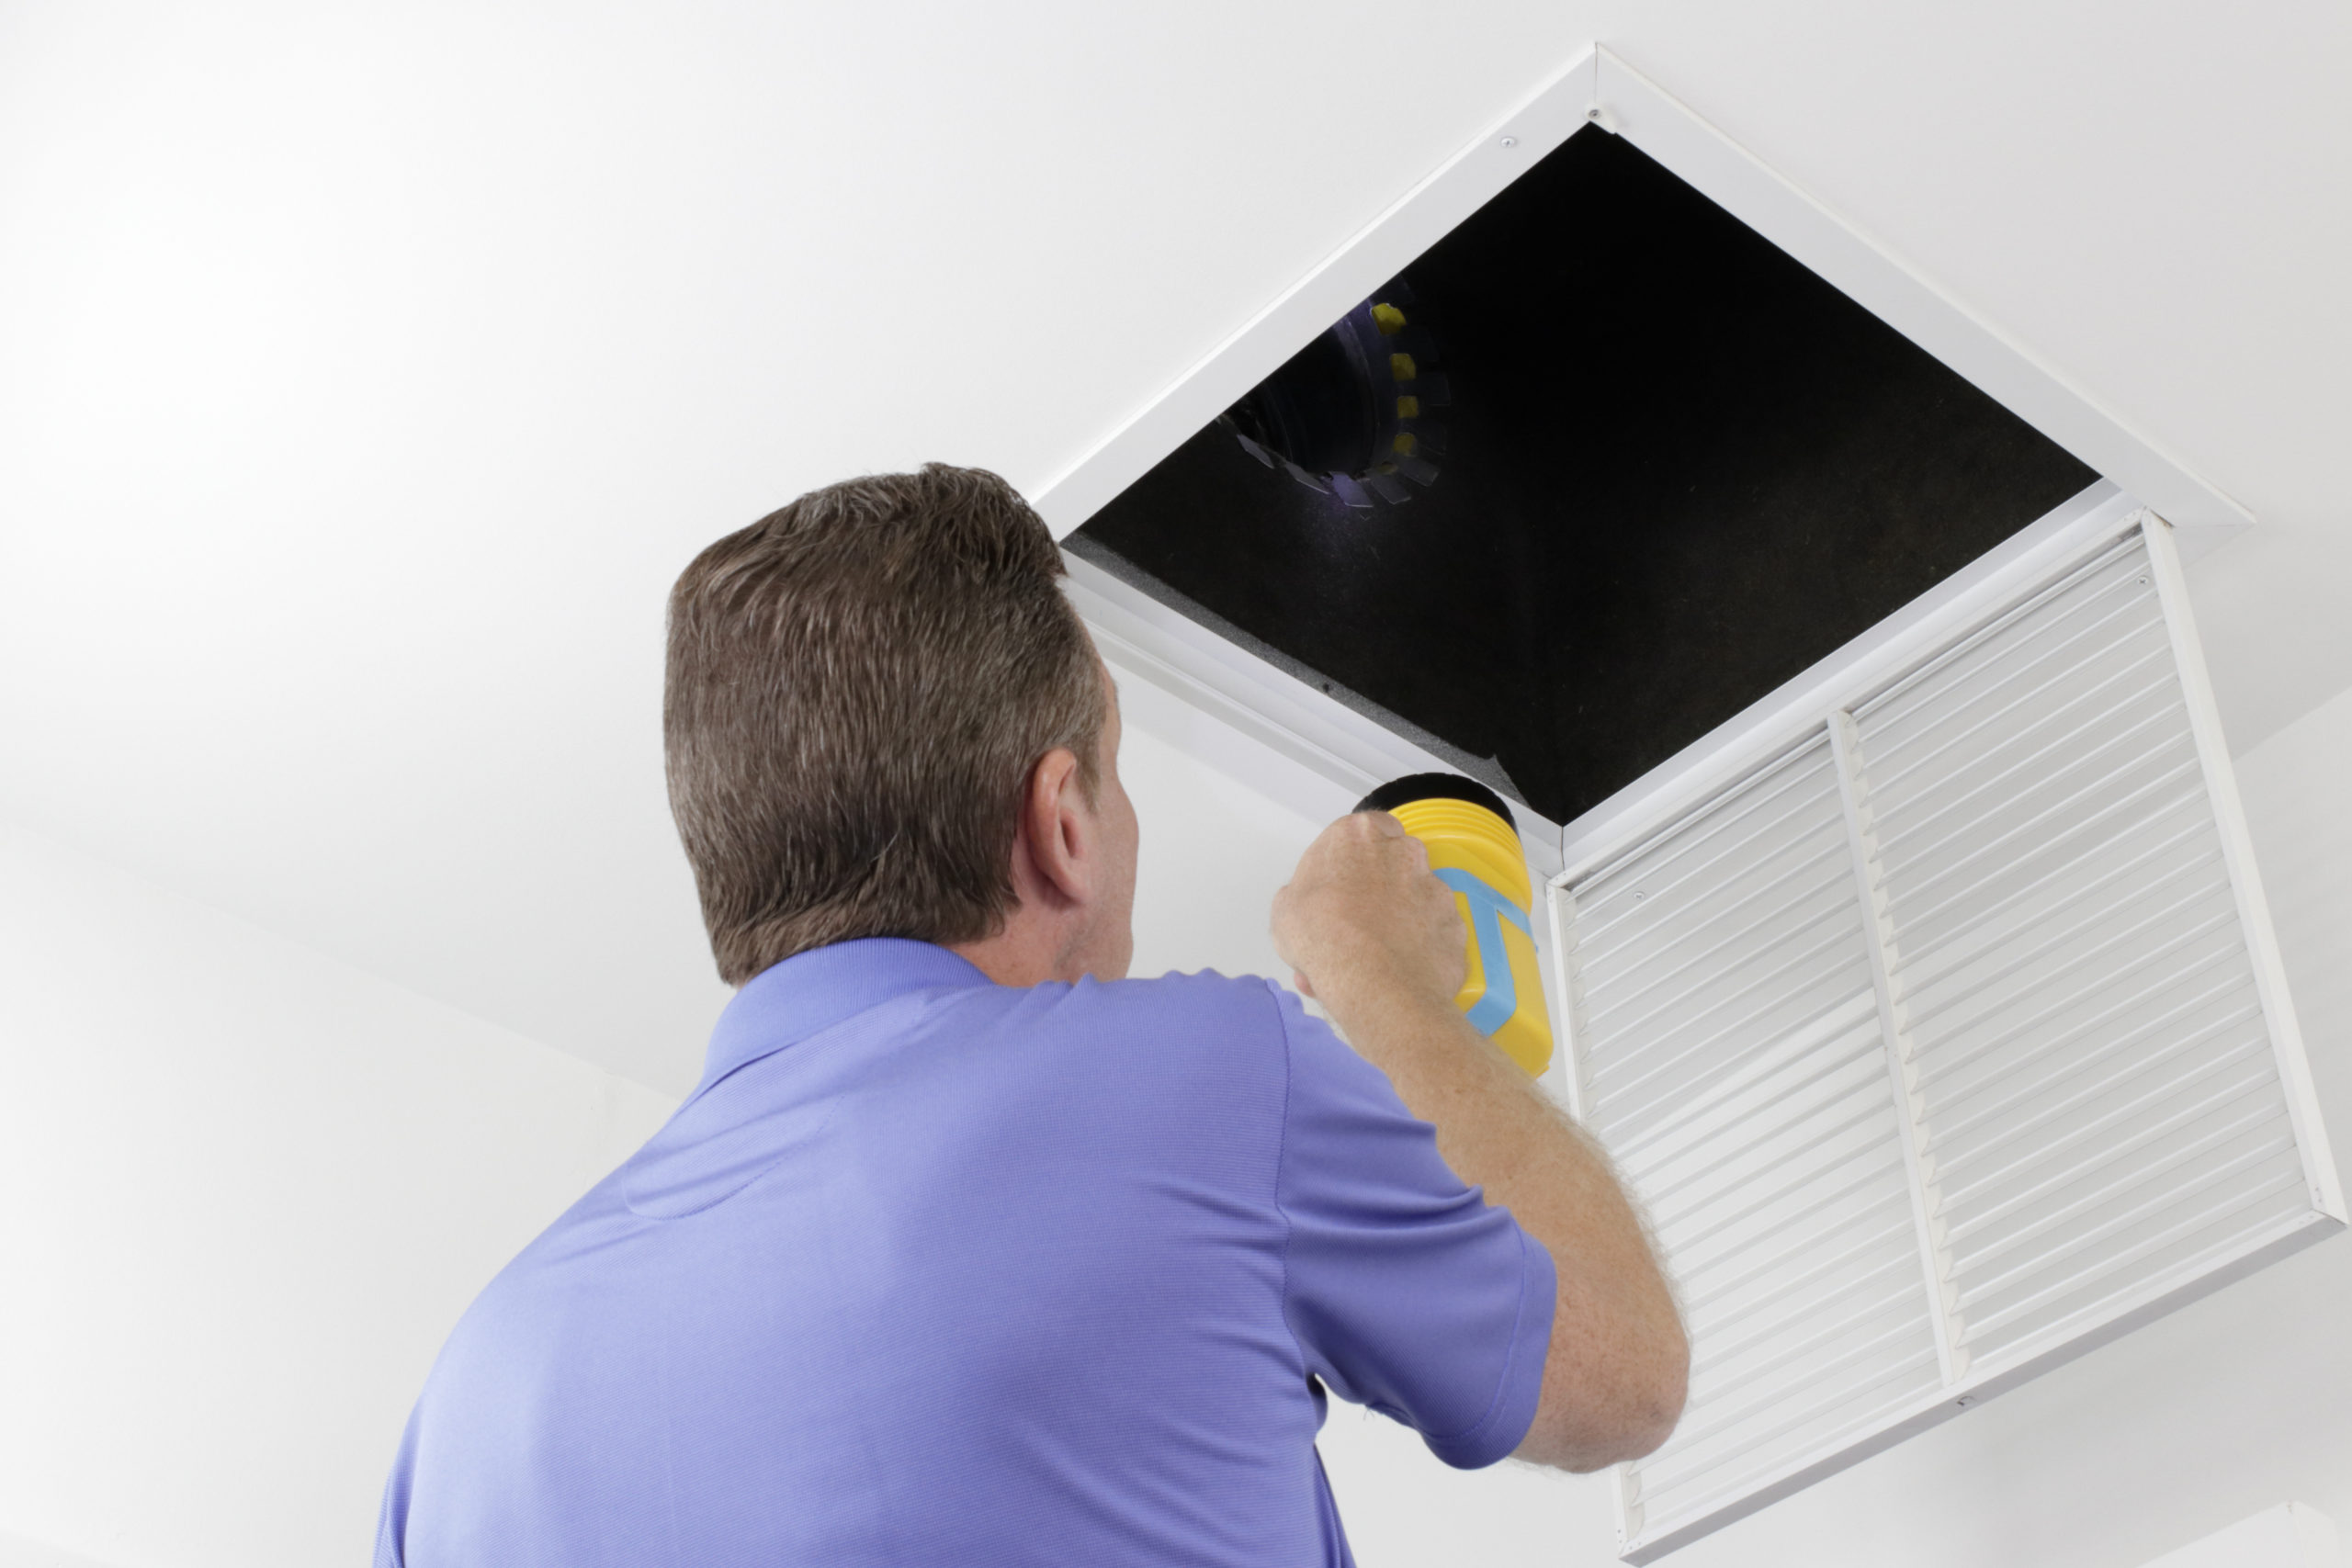 Older male with a yellow flashlight examining HVAC ducts in a large square vent. Male technician looking over the air ducts inside a home air intake vent.